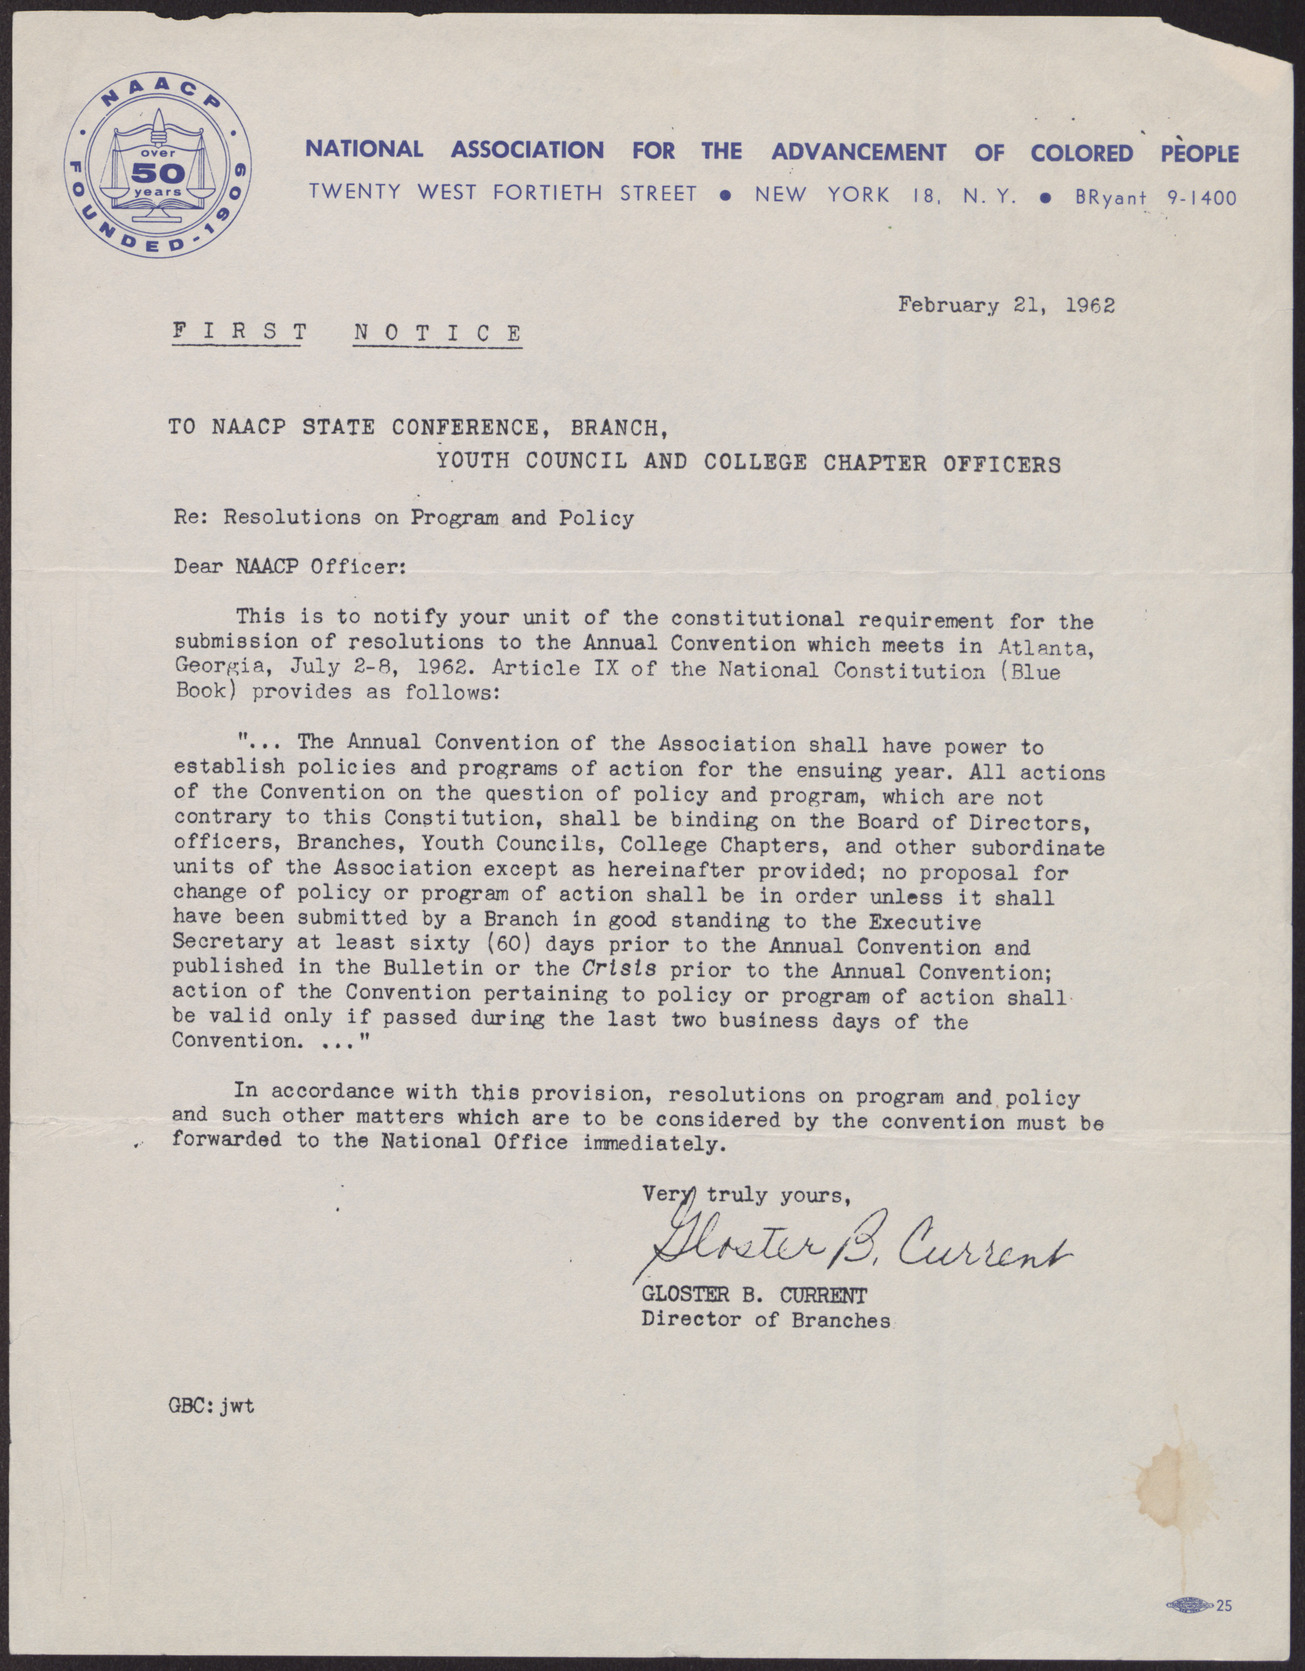 Letter to NAACP Officers from Gloster B. Current, February 21, 1962